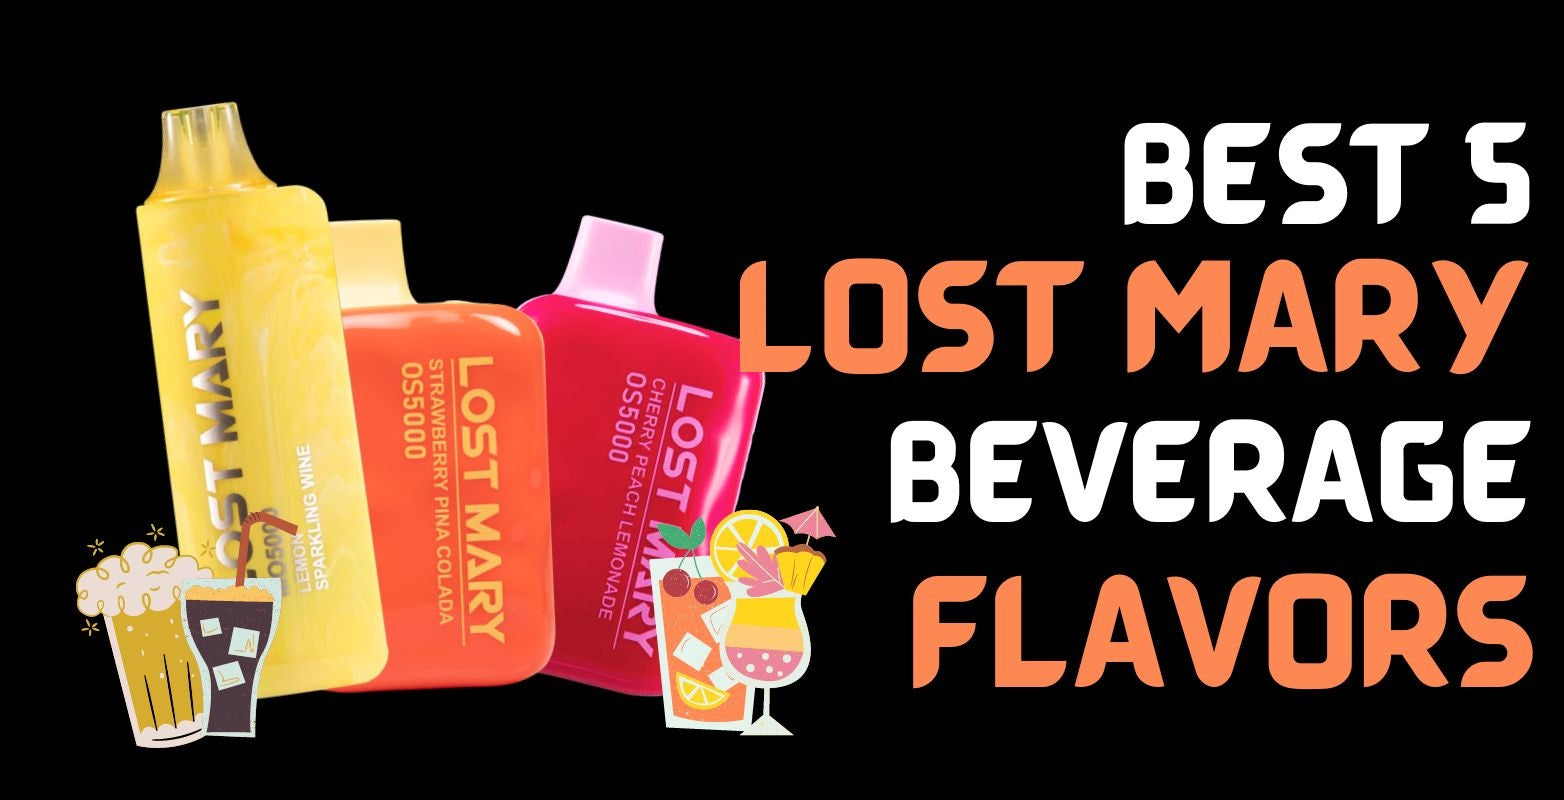 7 Lost Mary Beverage Flavors To Quench Your Vape Cravings